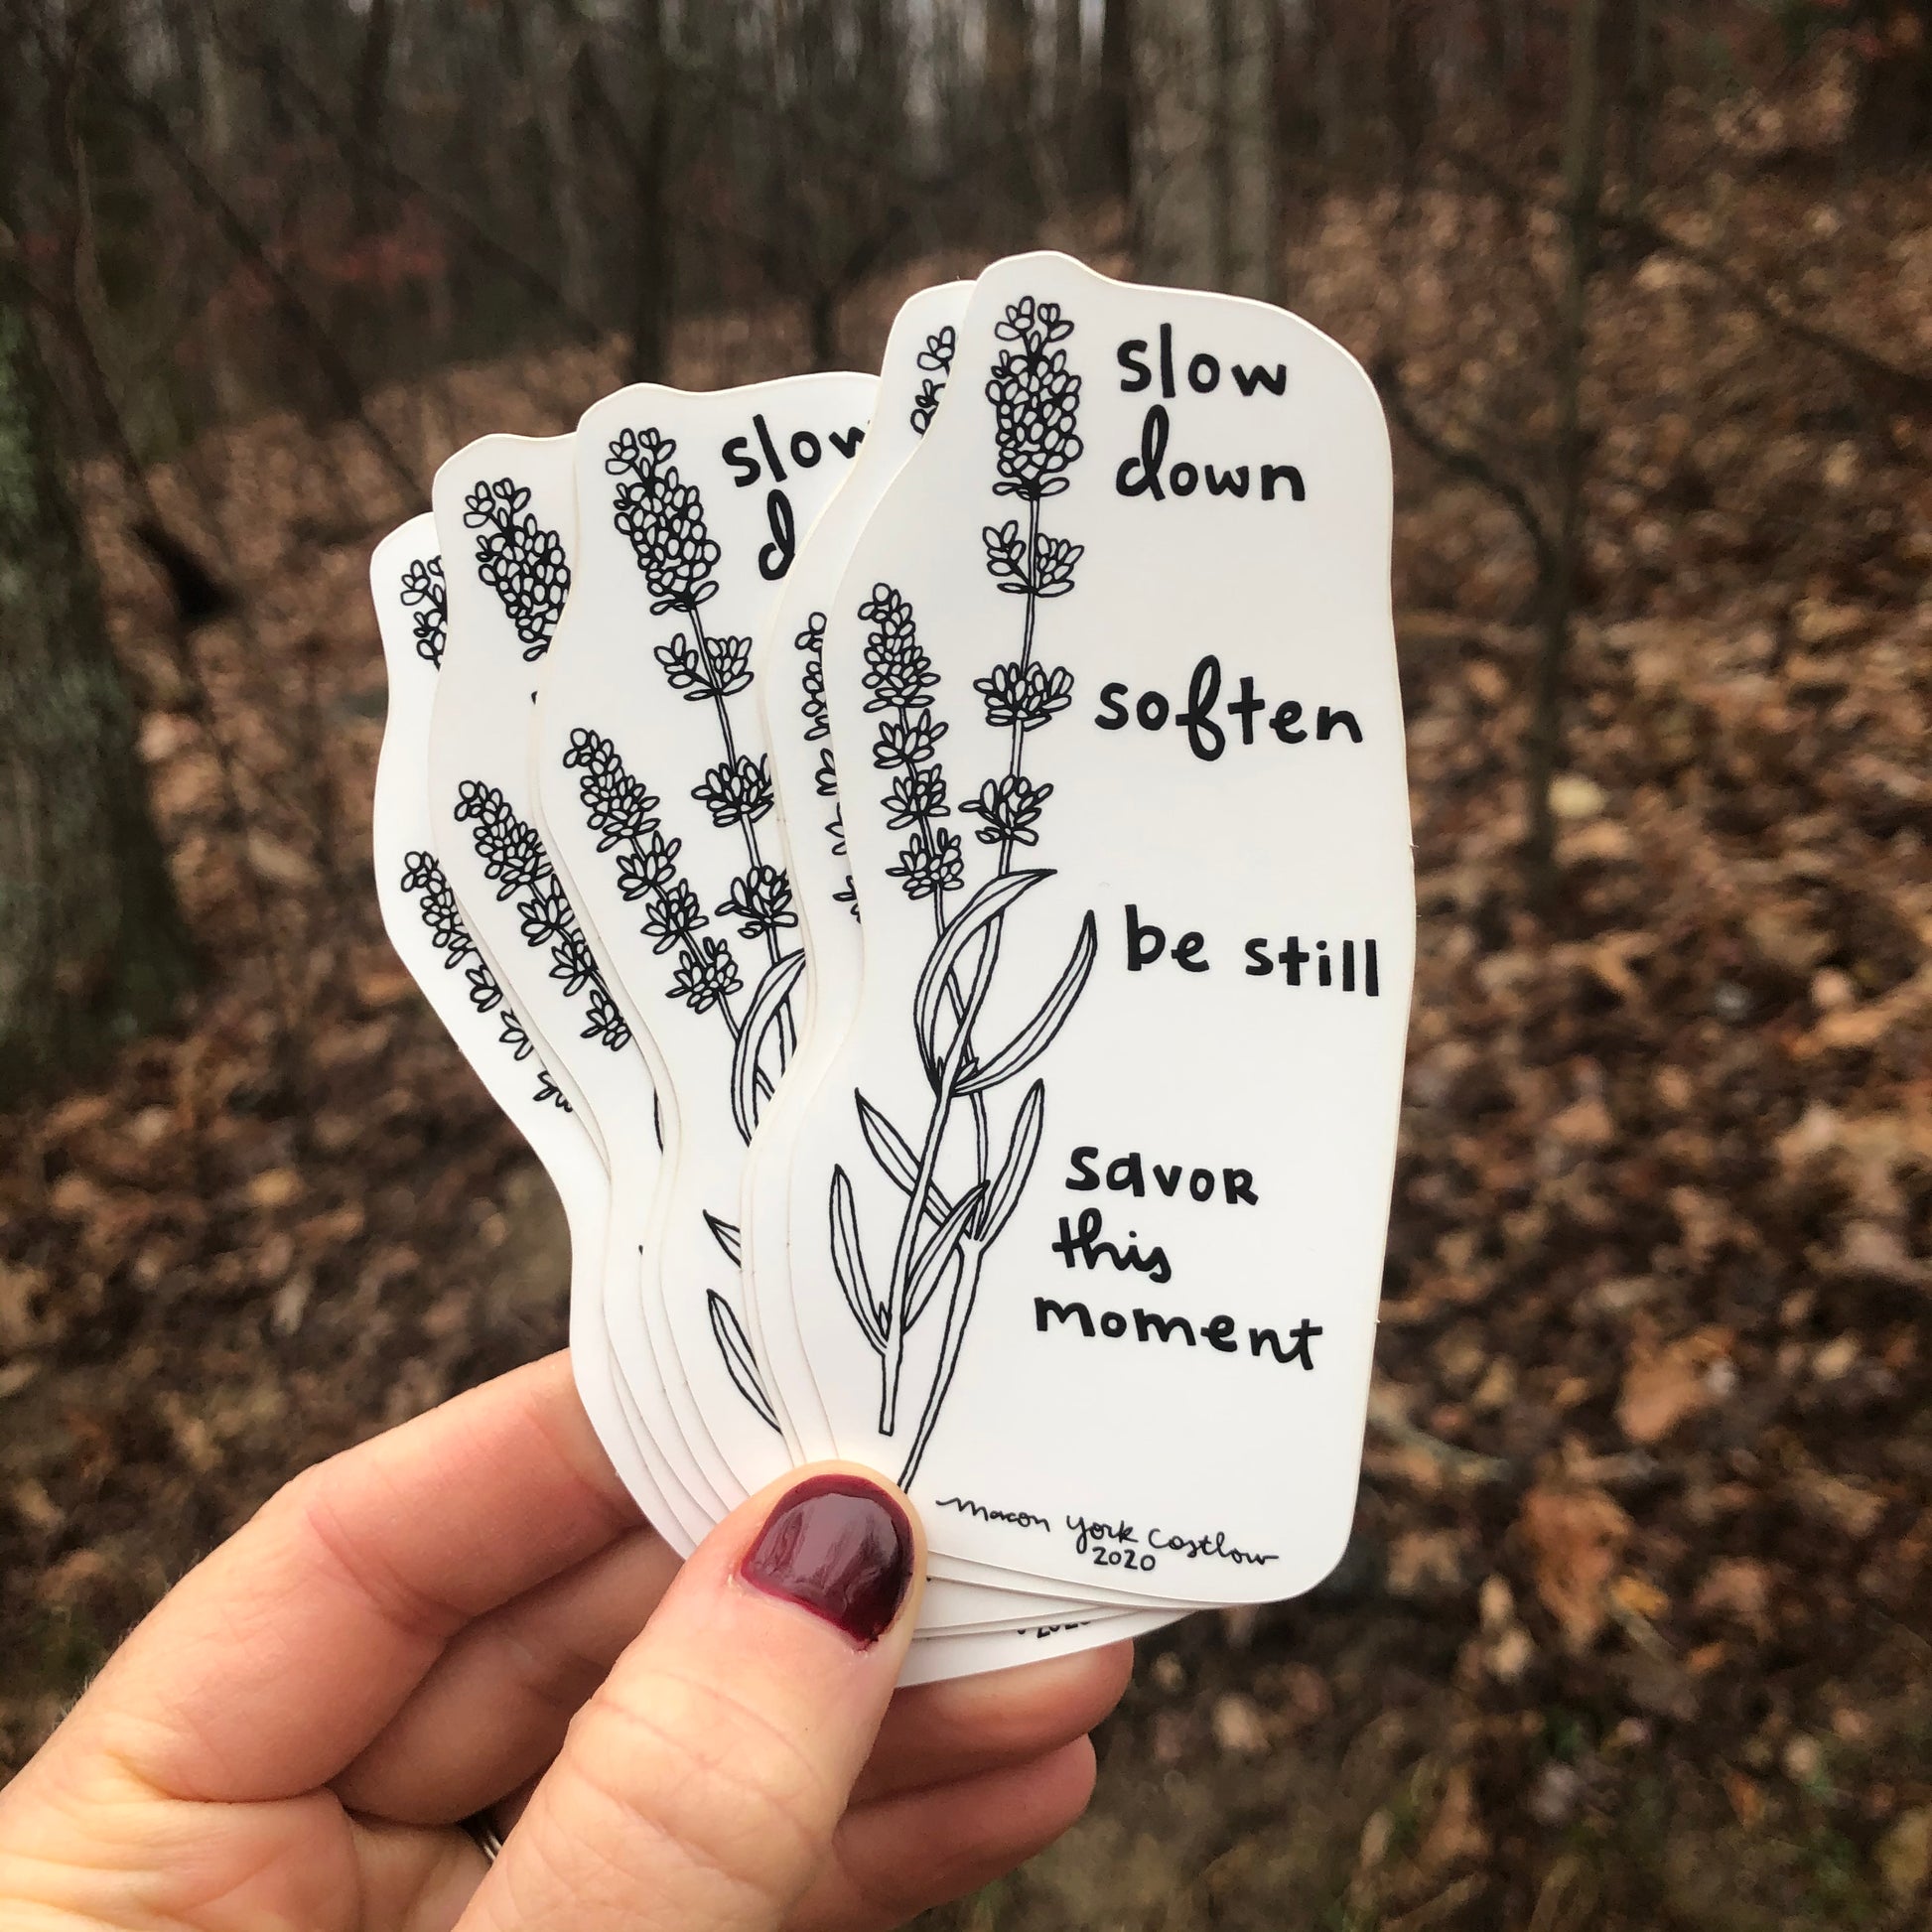 This Vinyl Sticker features original text by Macon York, hand drawn in her whimsical, folk art style. Hand-drawn lavender accompanies the text. The text reads "Slow Down. Soften. Be still. Savor this moment." A group of stickers fanned out is shown in front of a winter forest. 